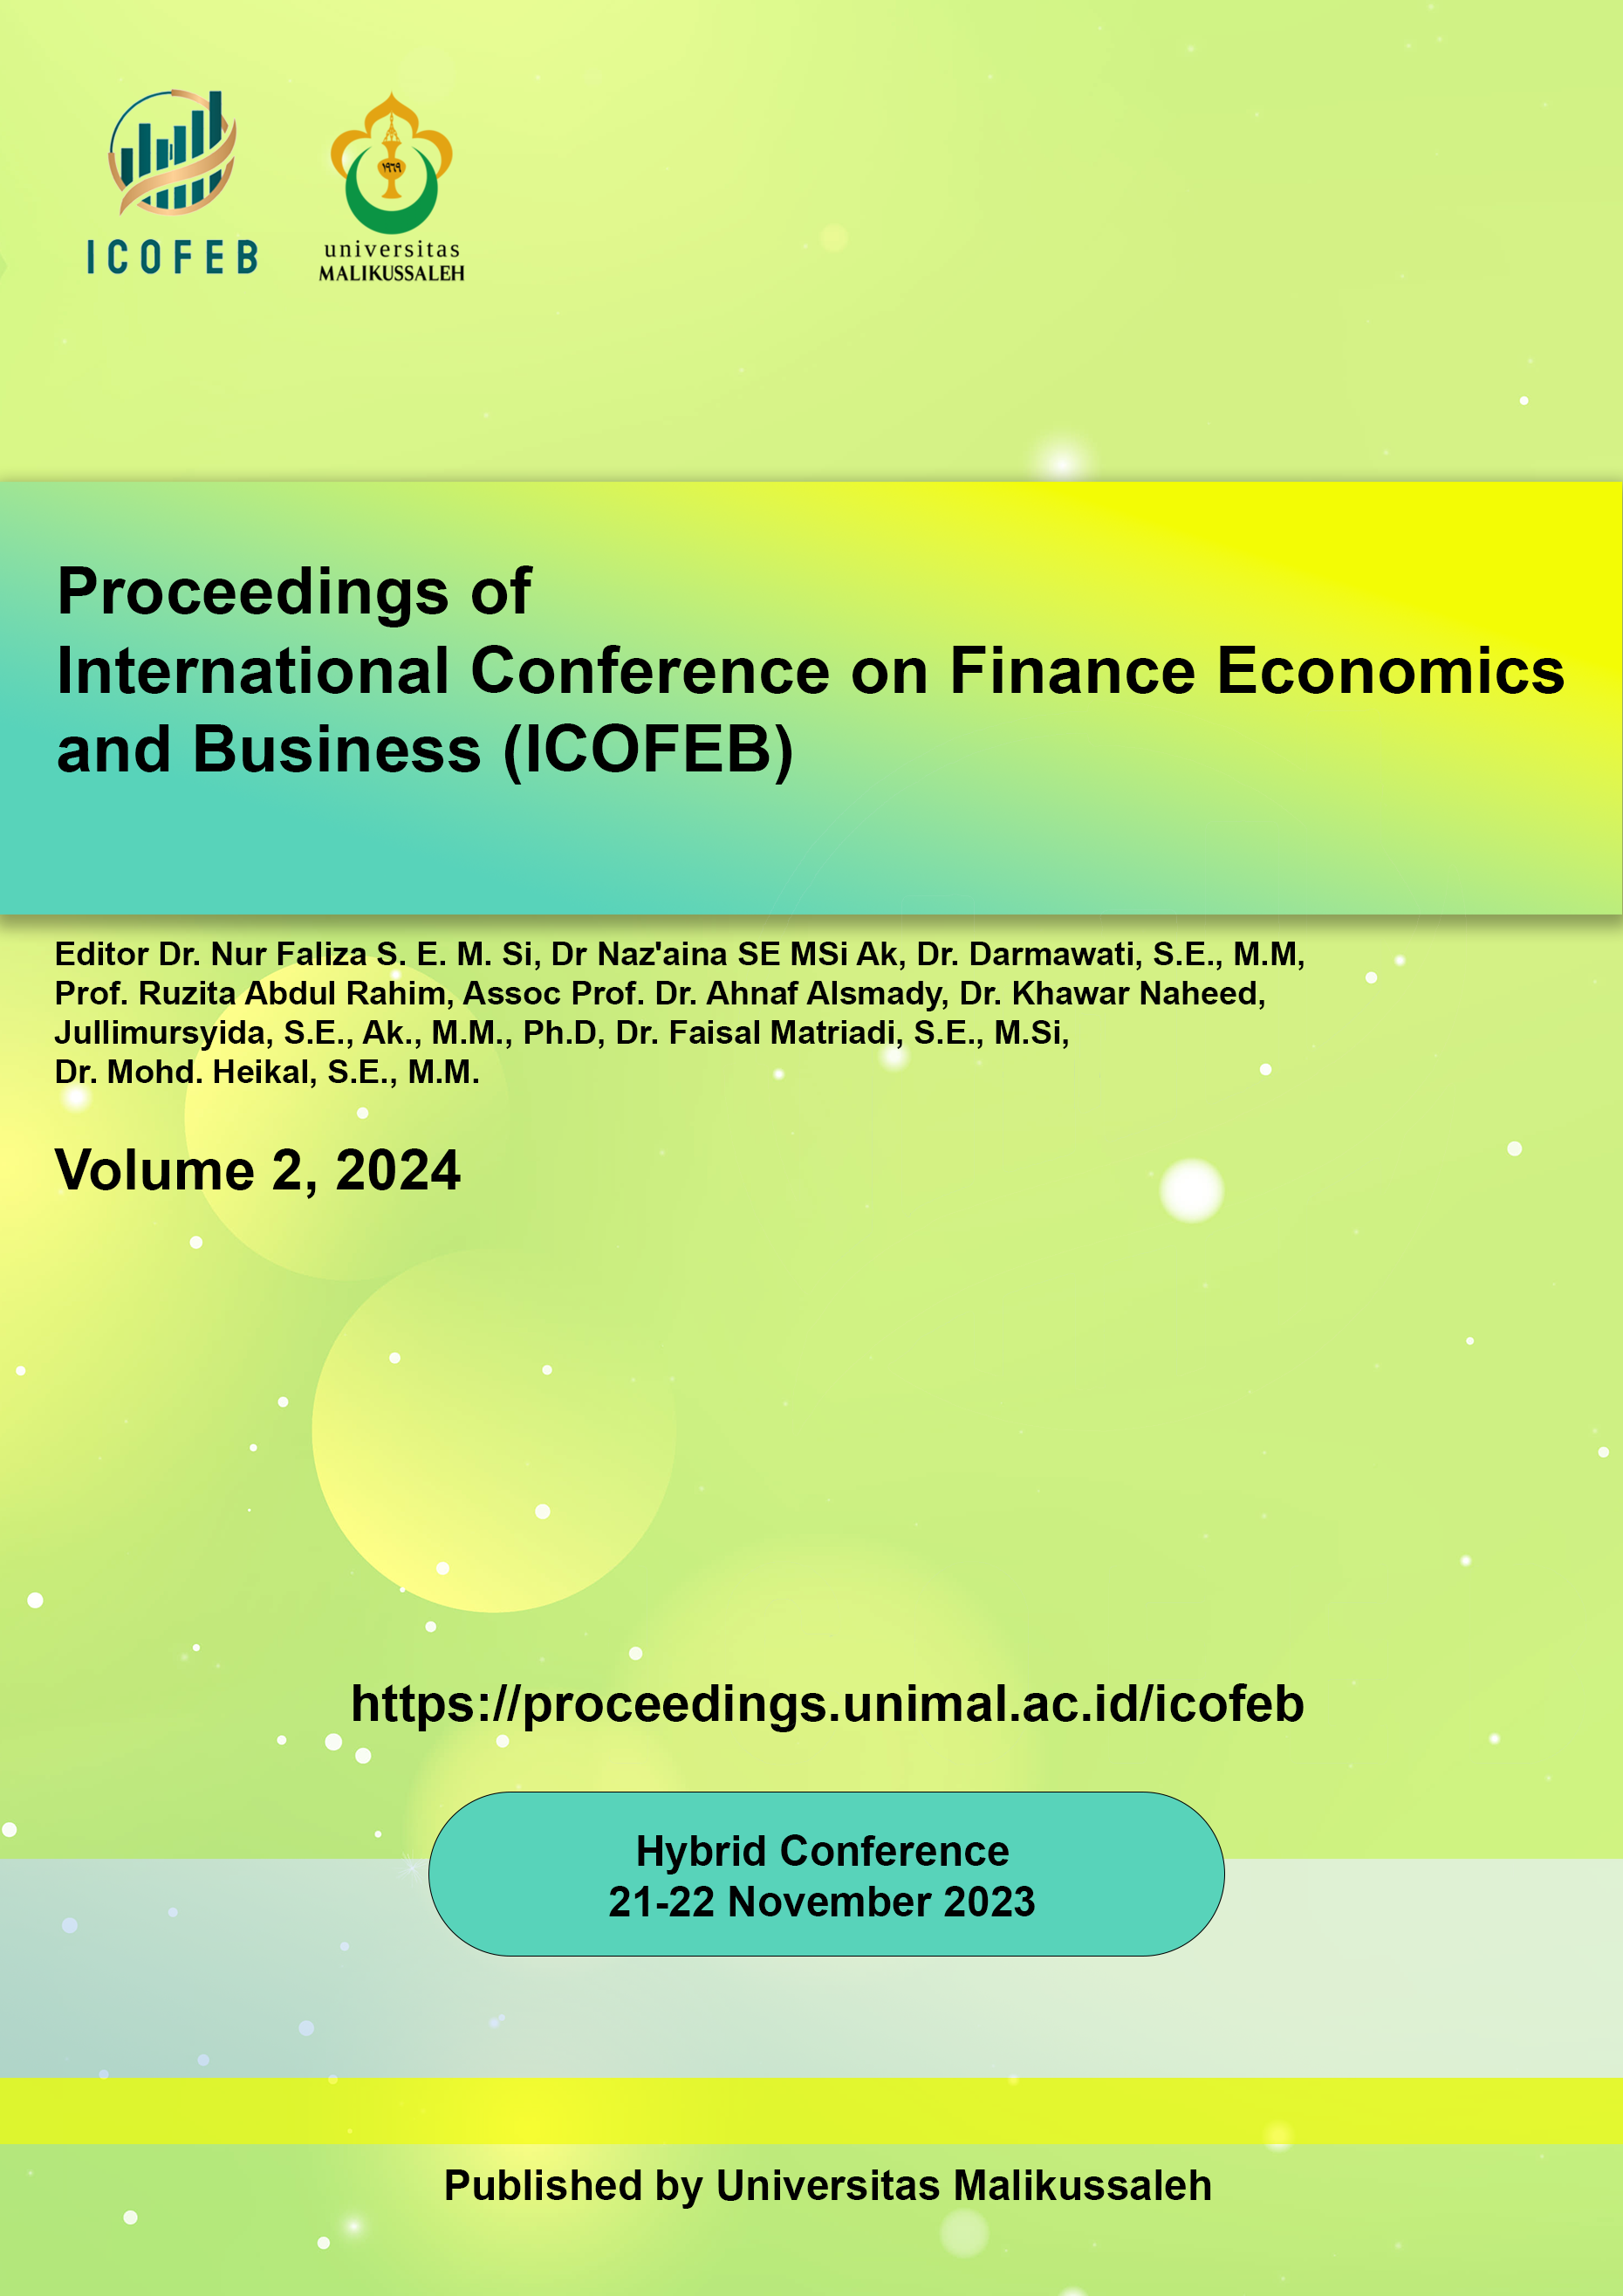 					View Vol. 2 (2024): International Conference on Finance Economics and Business (ICOFEB)
				